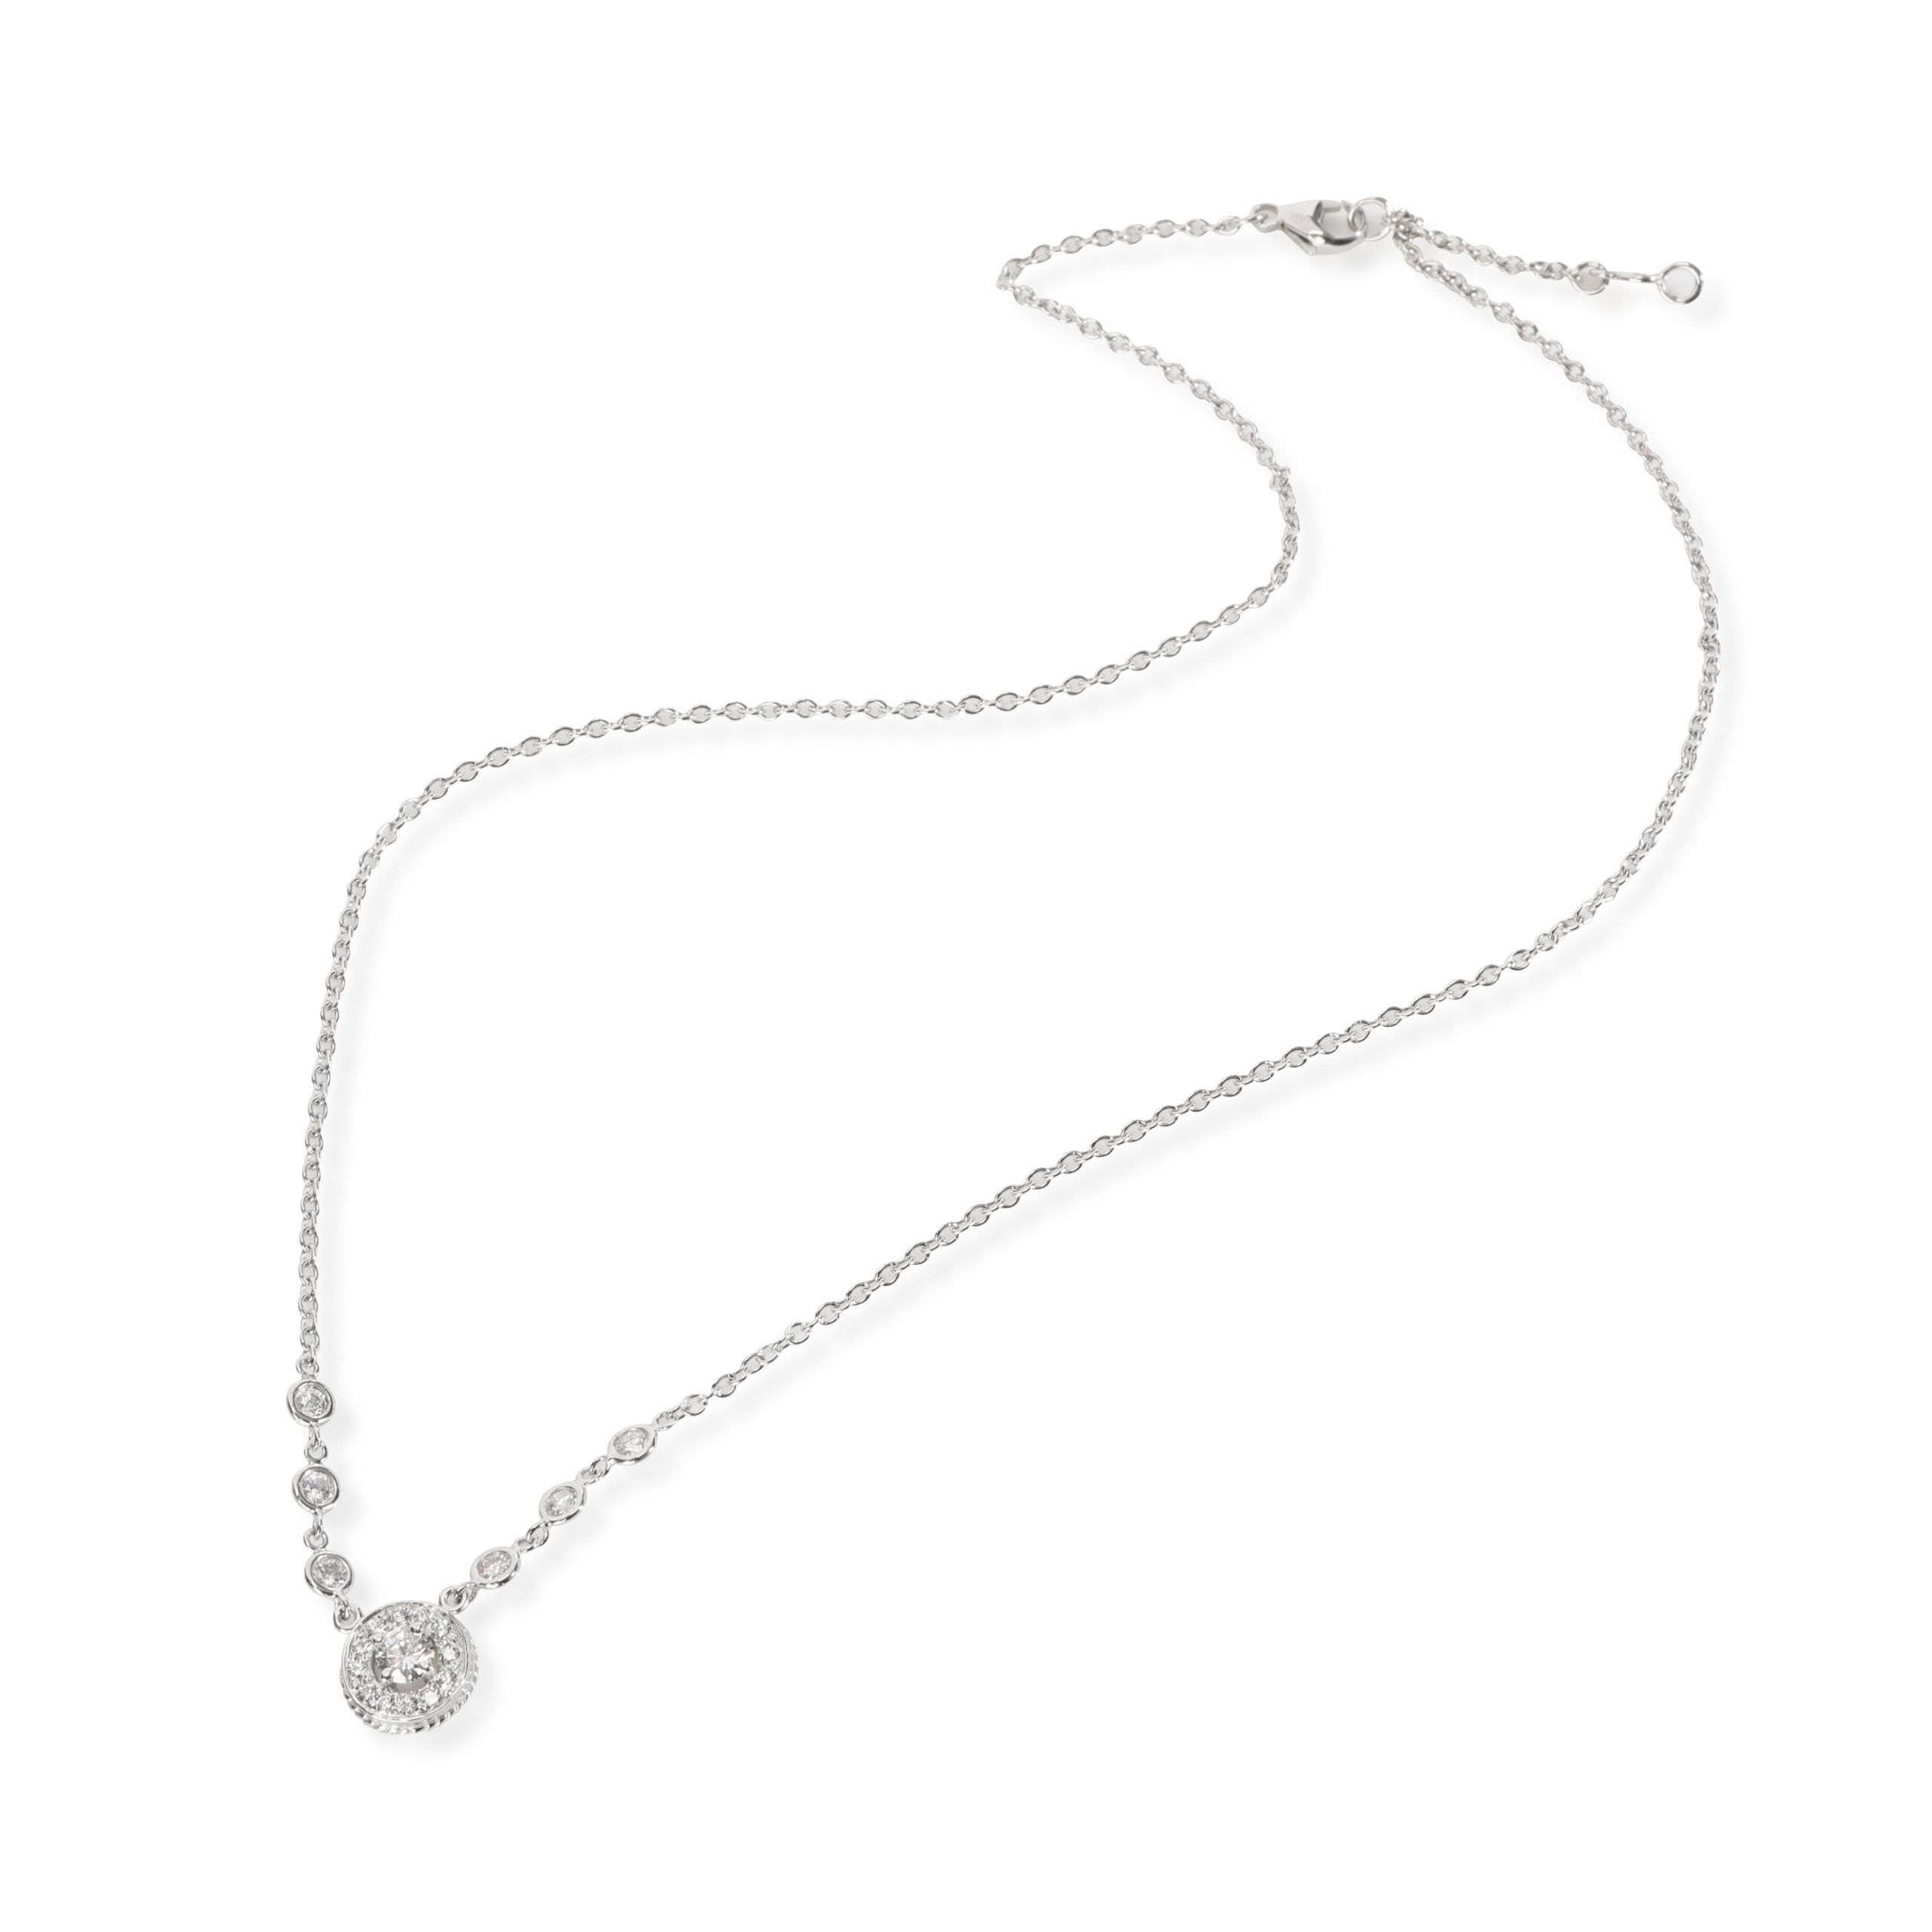 Halo Halo Diamond Necklace in 18K White Gold 0.67 CTW Size ONE SIZE - 2 Preview